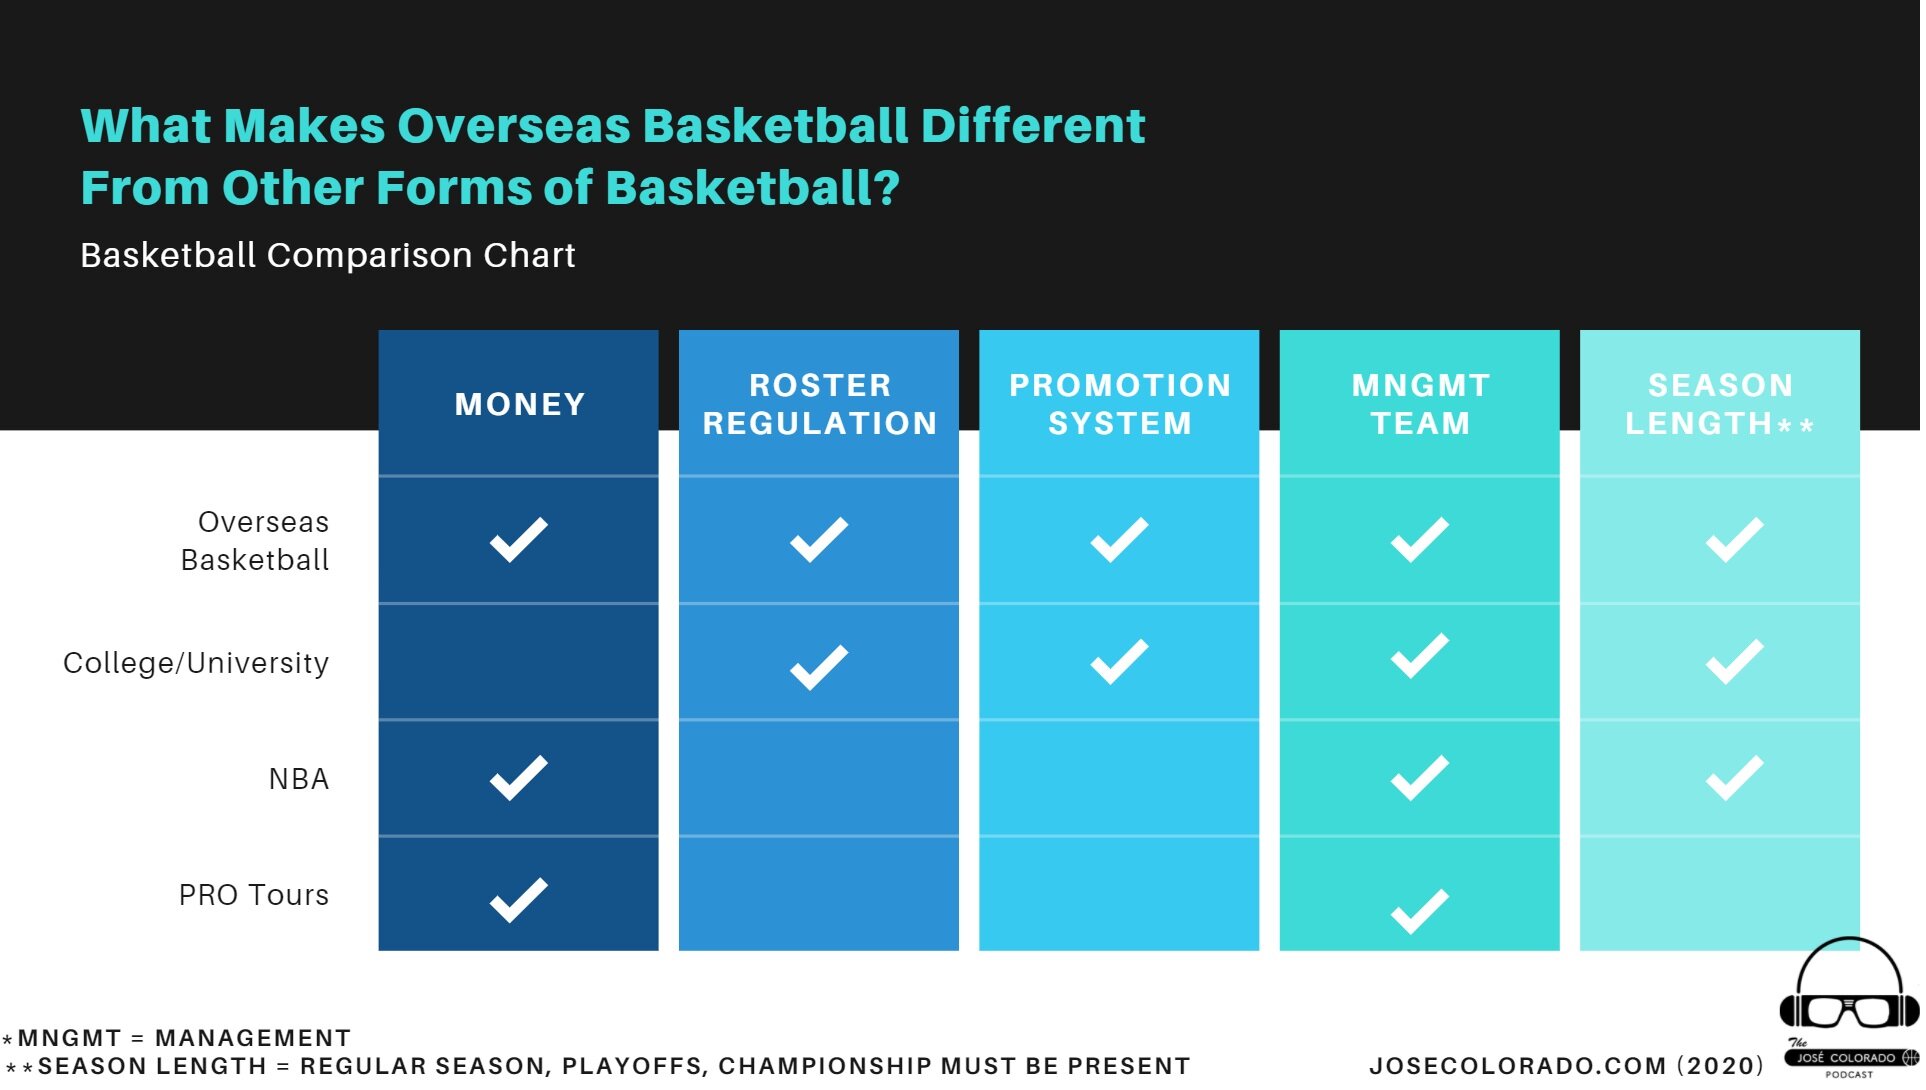 Overseas Basketball characteristics are different from other forms of basketball.